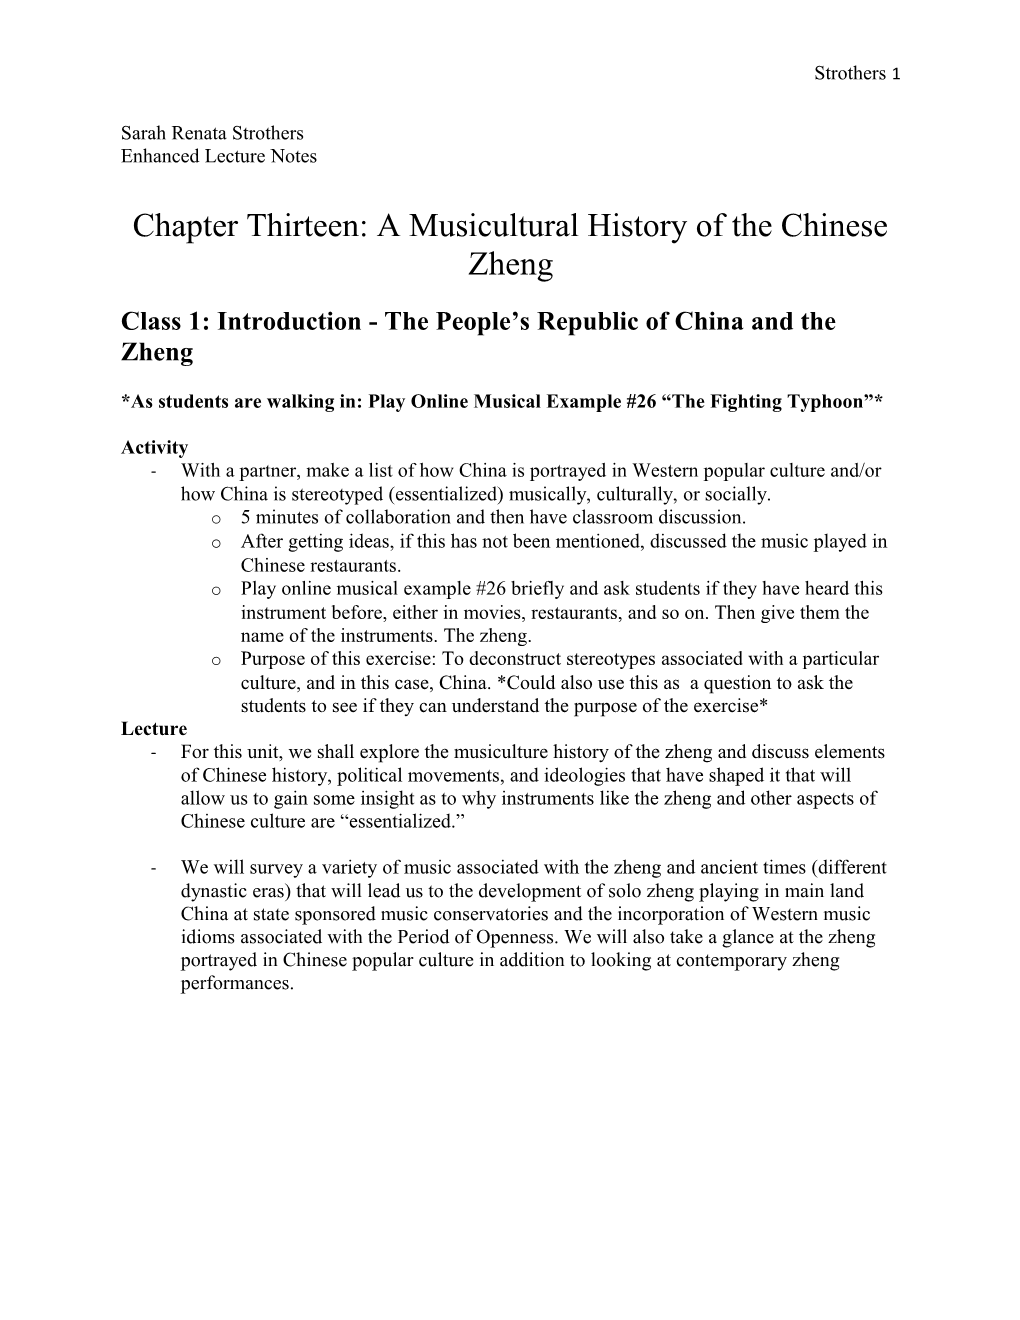 Class 1: Introduction - the People S Republic of China and the Zheng